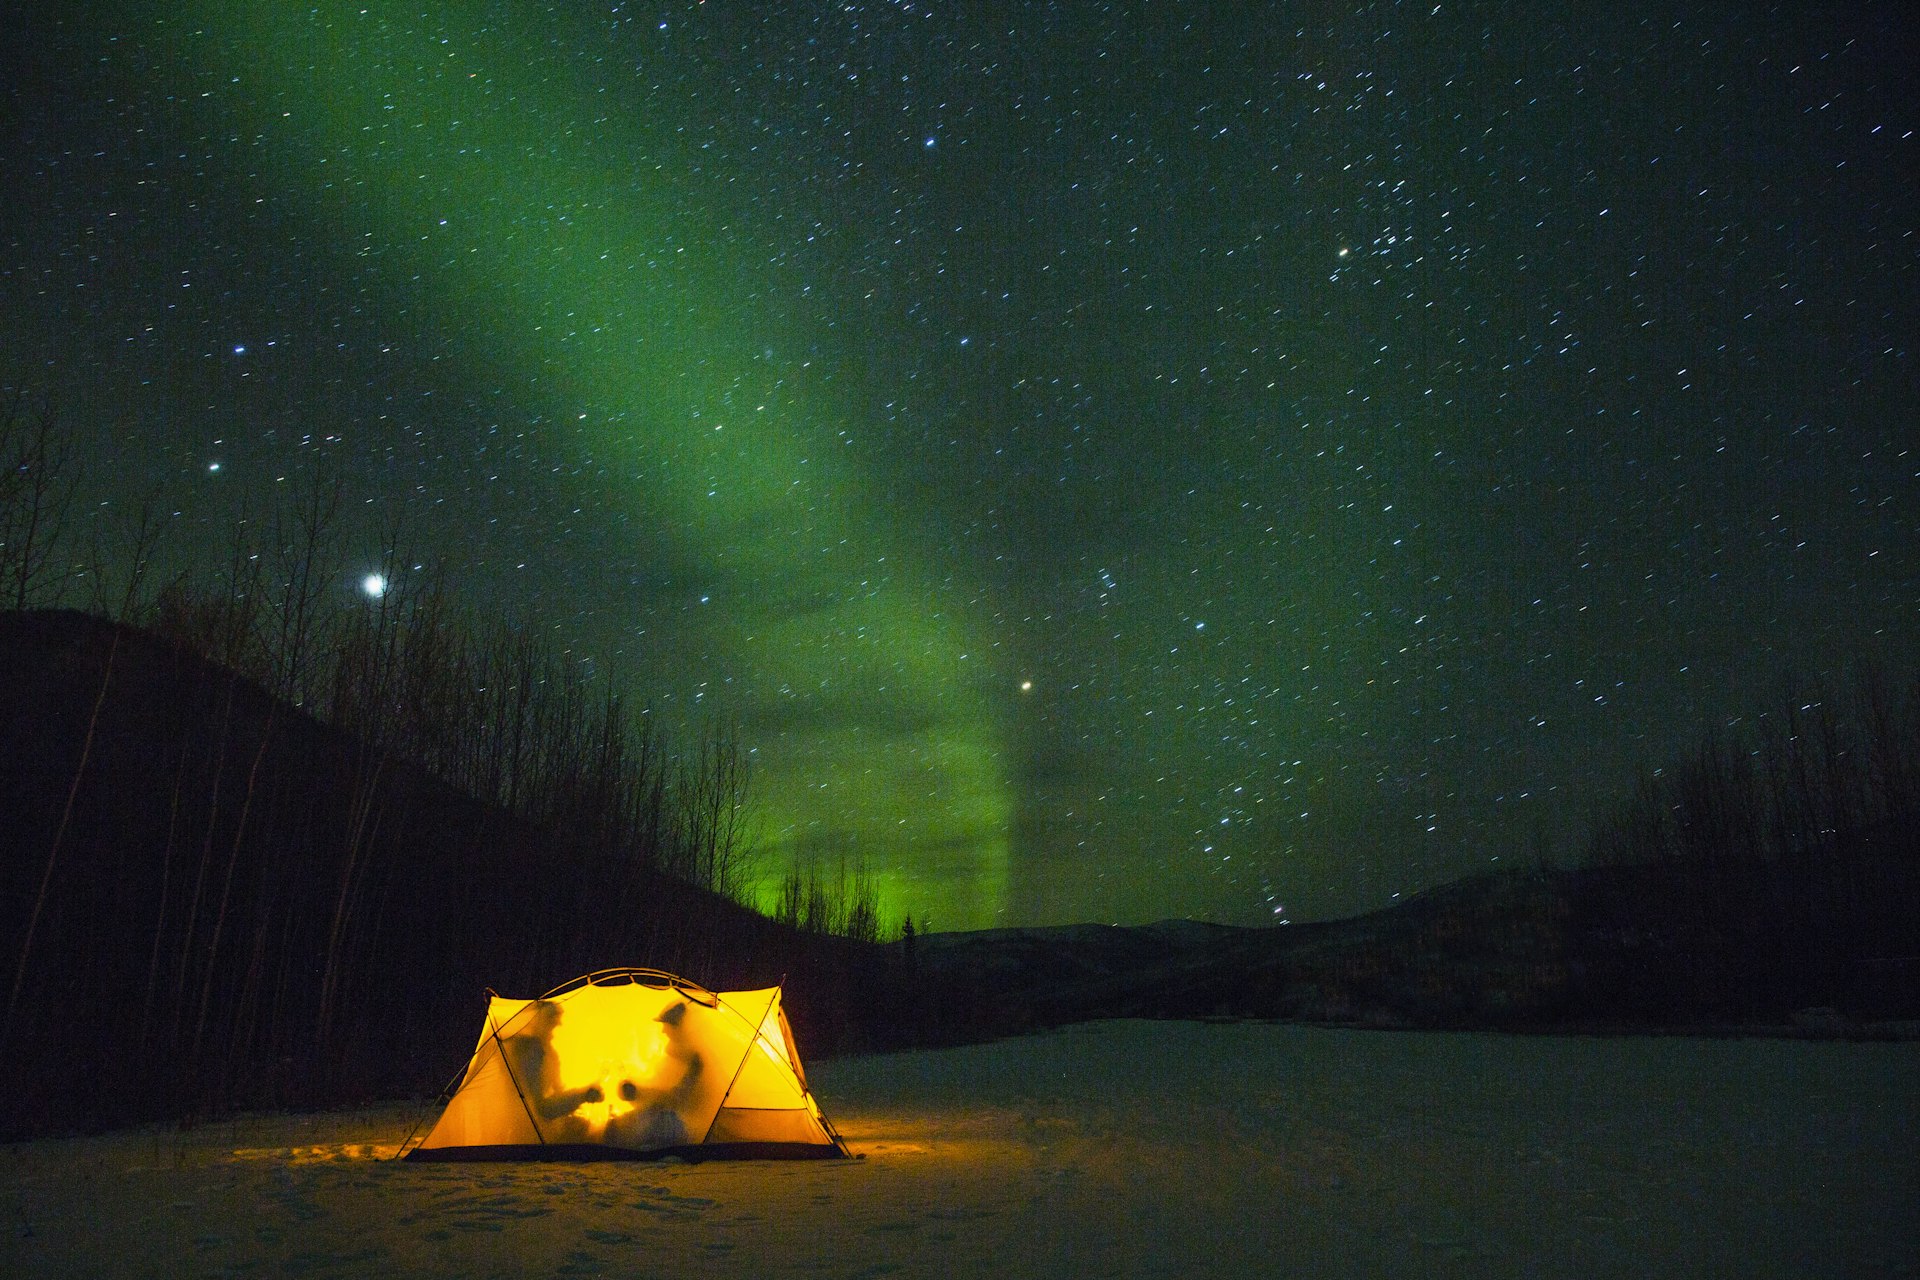 A warmly lit tent on a snowy ground at night with the green hues of the Northern Lights in the background, under a star-filled sky.